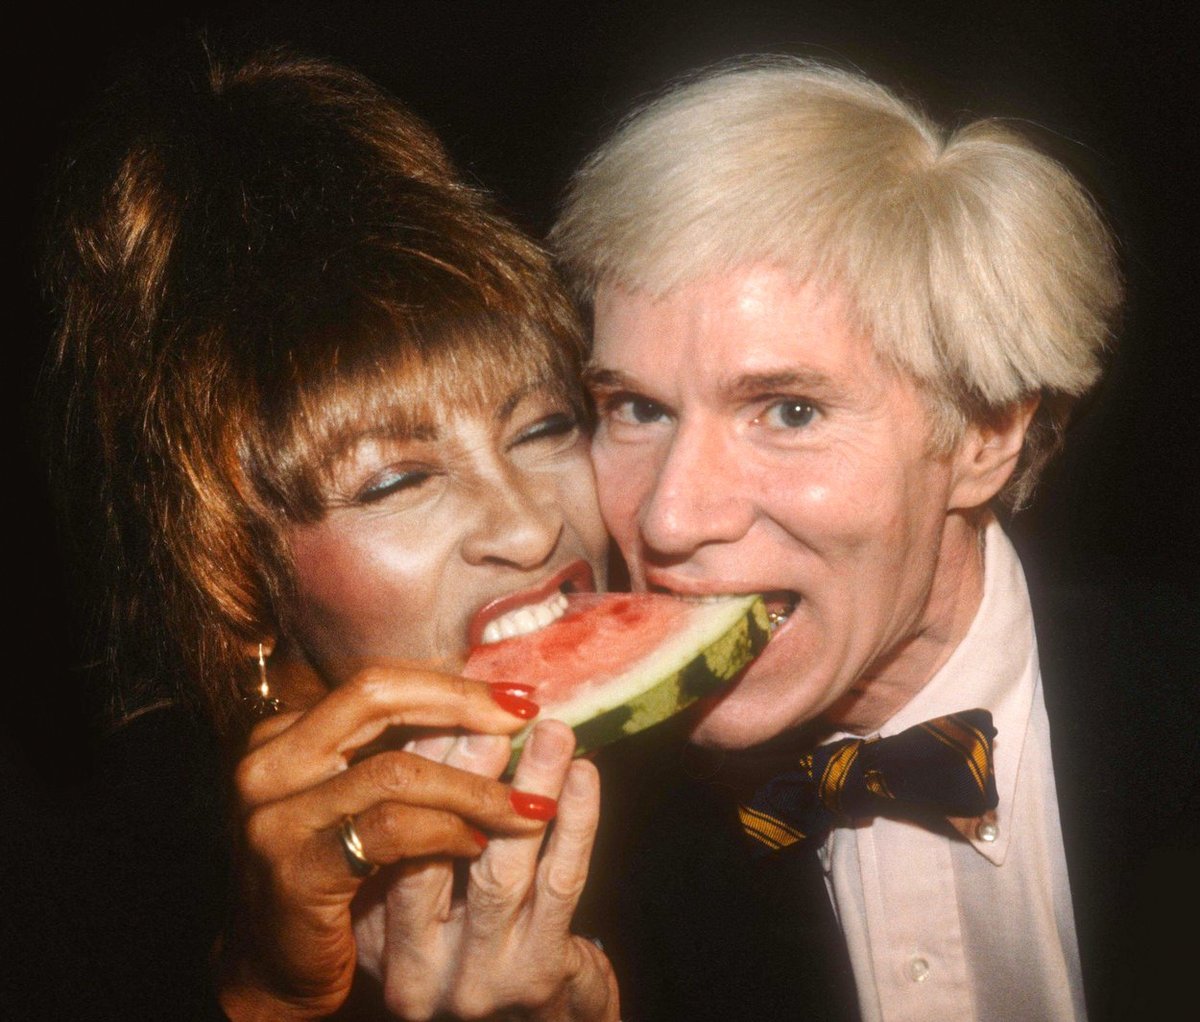 In Memoriam: spectral Pop Art visionary Andy Warhol (6 August 1928 – 22 February 1987) died on this day. I will never stop being fascinated by this man’s oeuvre. Pictured: Warhol and soul diva #TinaTurner sharing watermelon at Atlanta's Limelight nightclub in 1981. #AndyWarhol